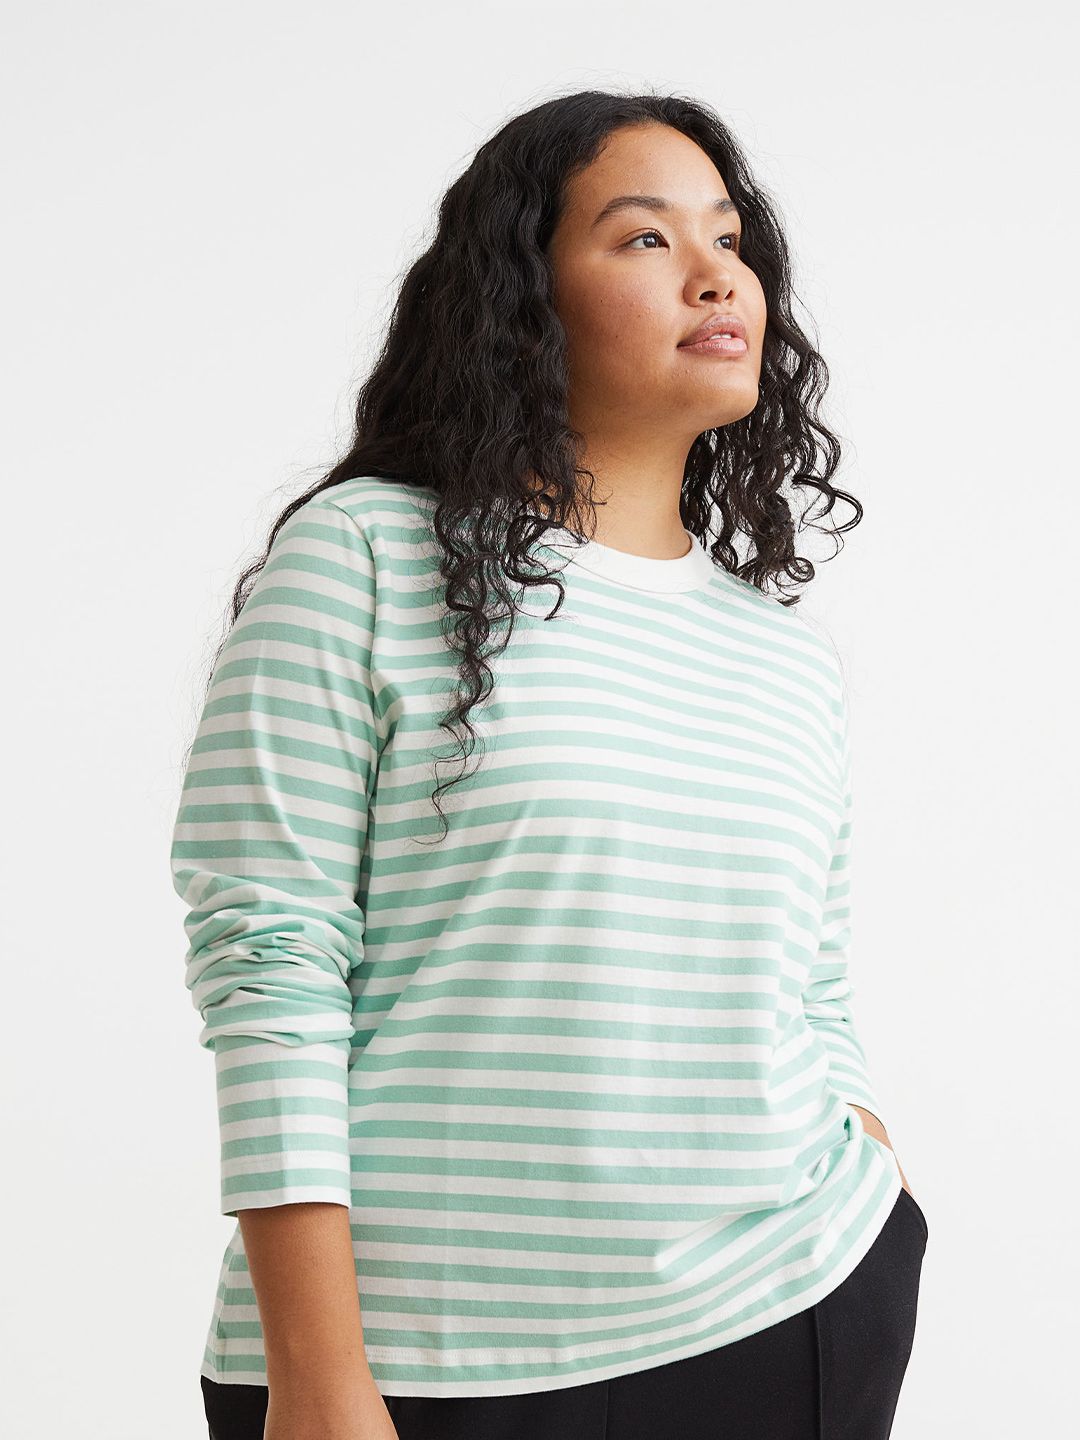 H&M+ Women White Striped Cotton Jersey Top Price in India